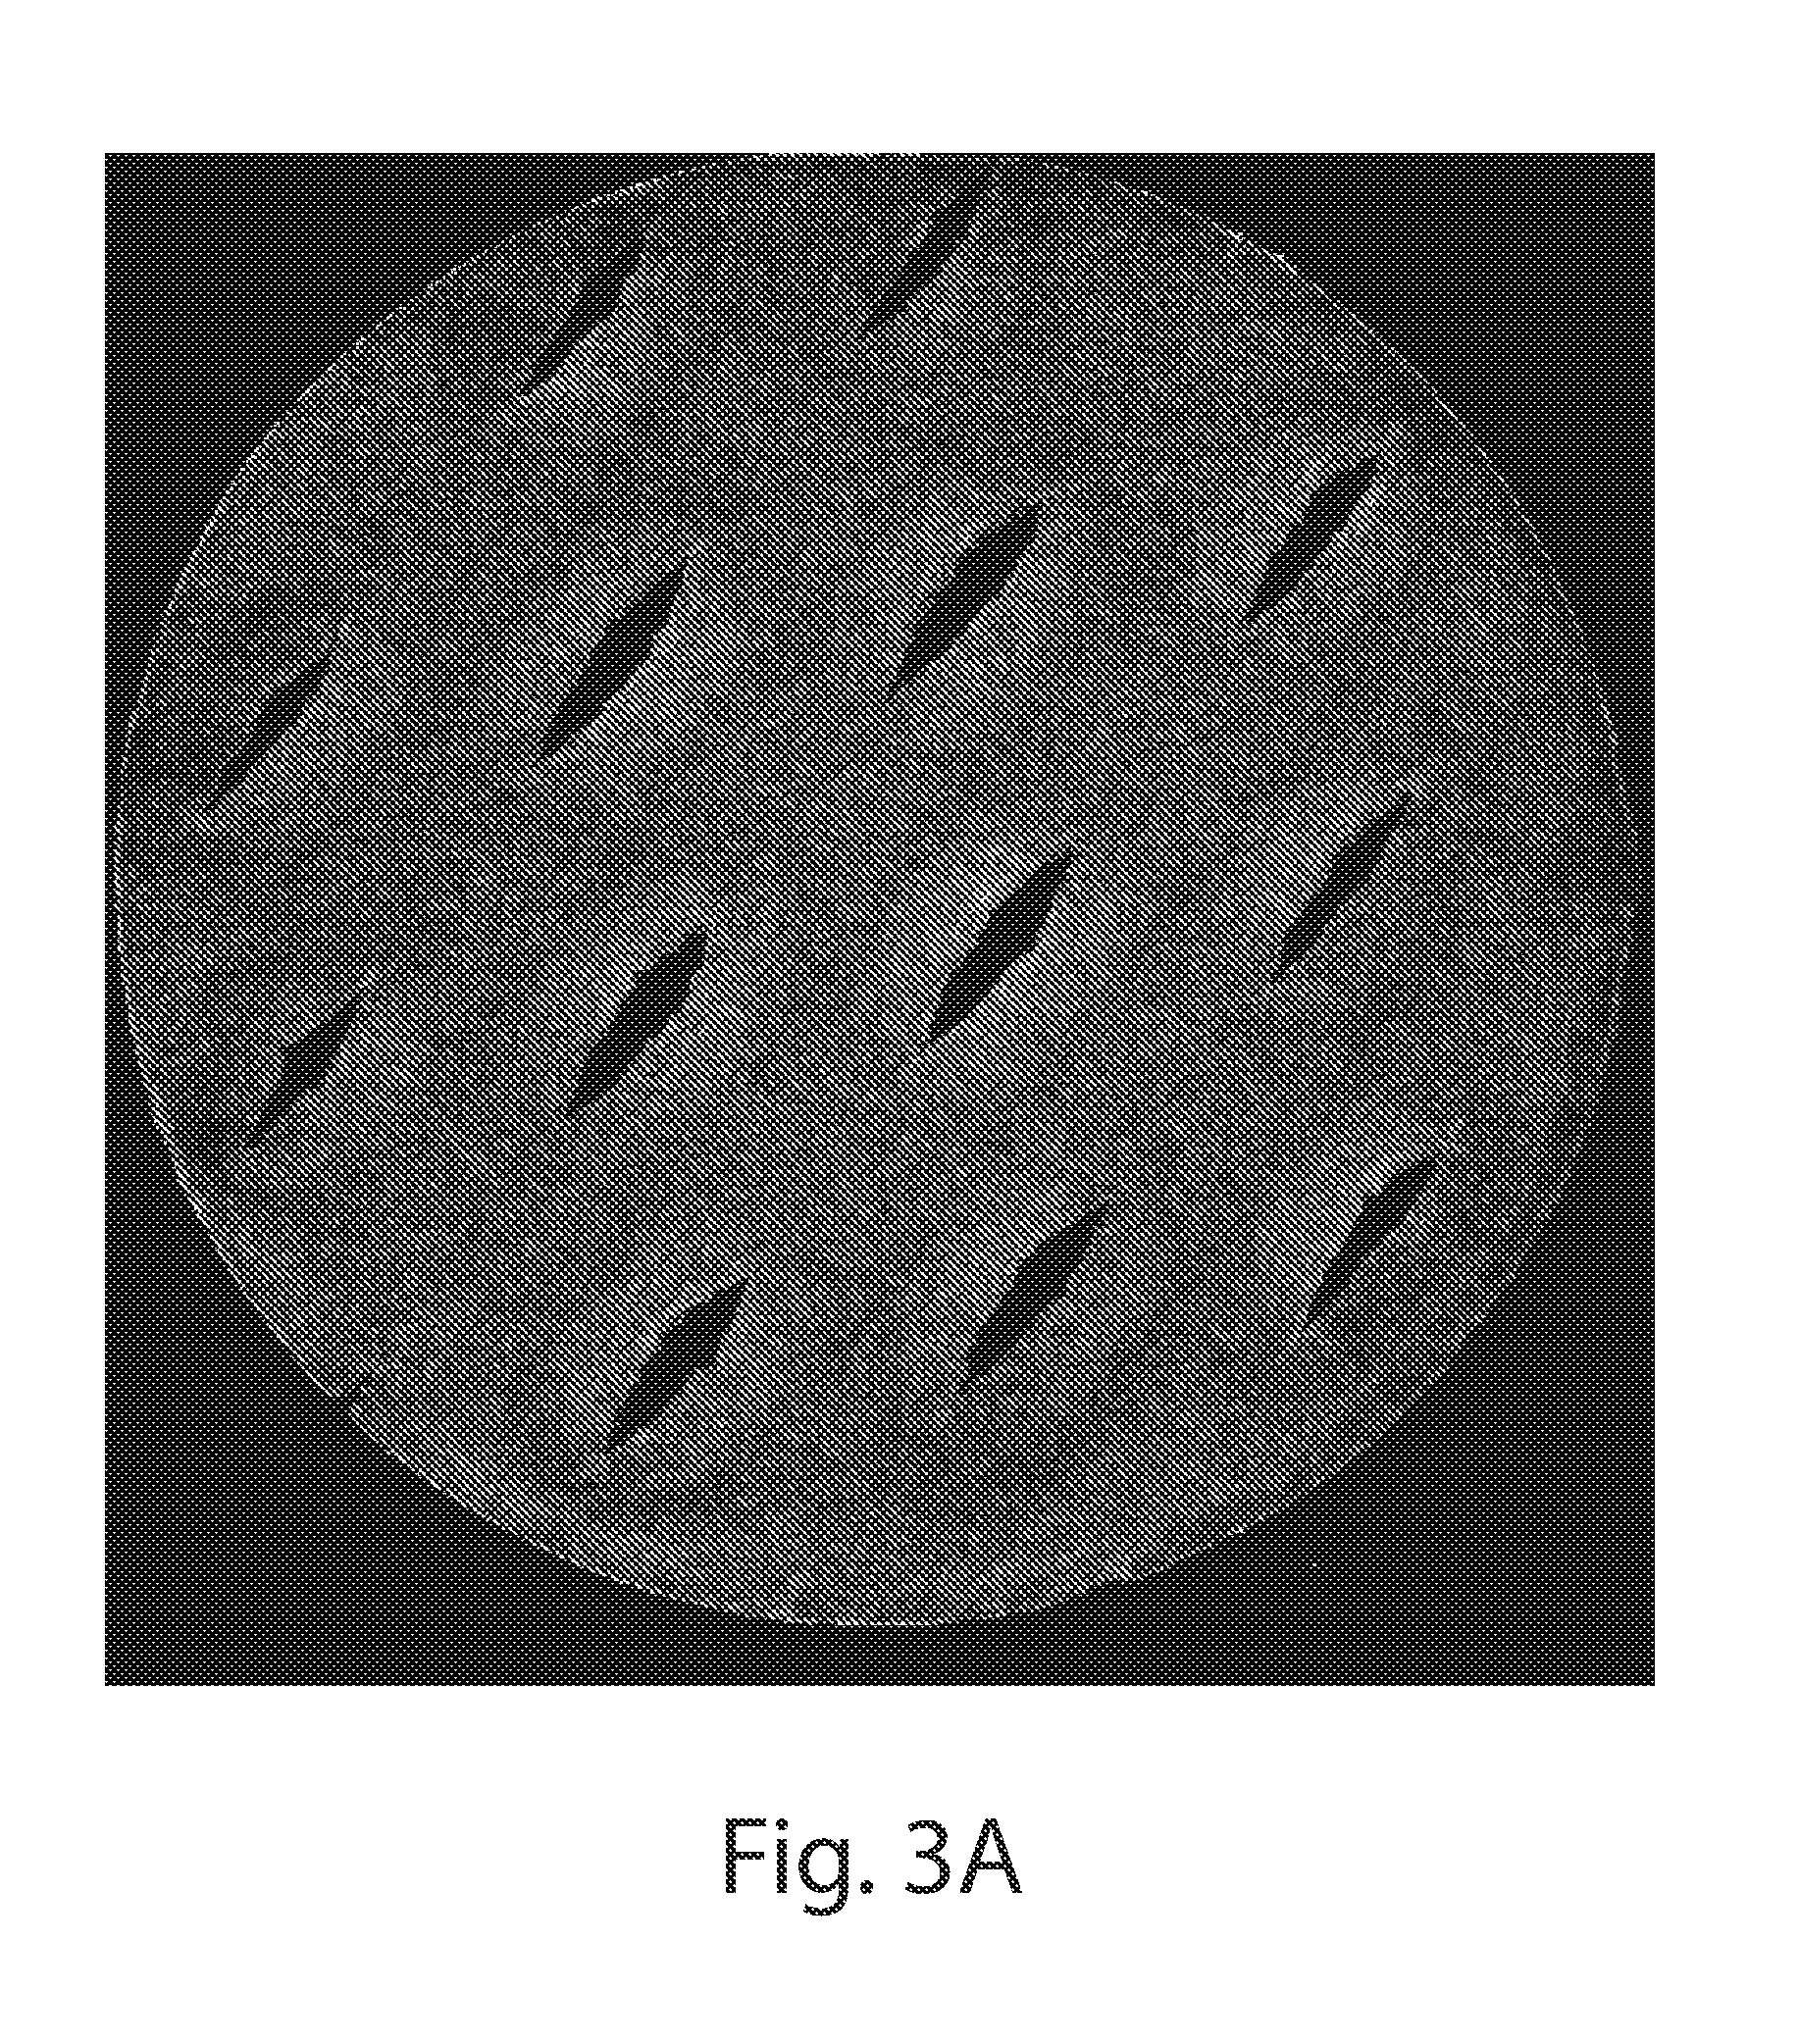 Apertured Fibrous Structures and Methods for Making Same